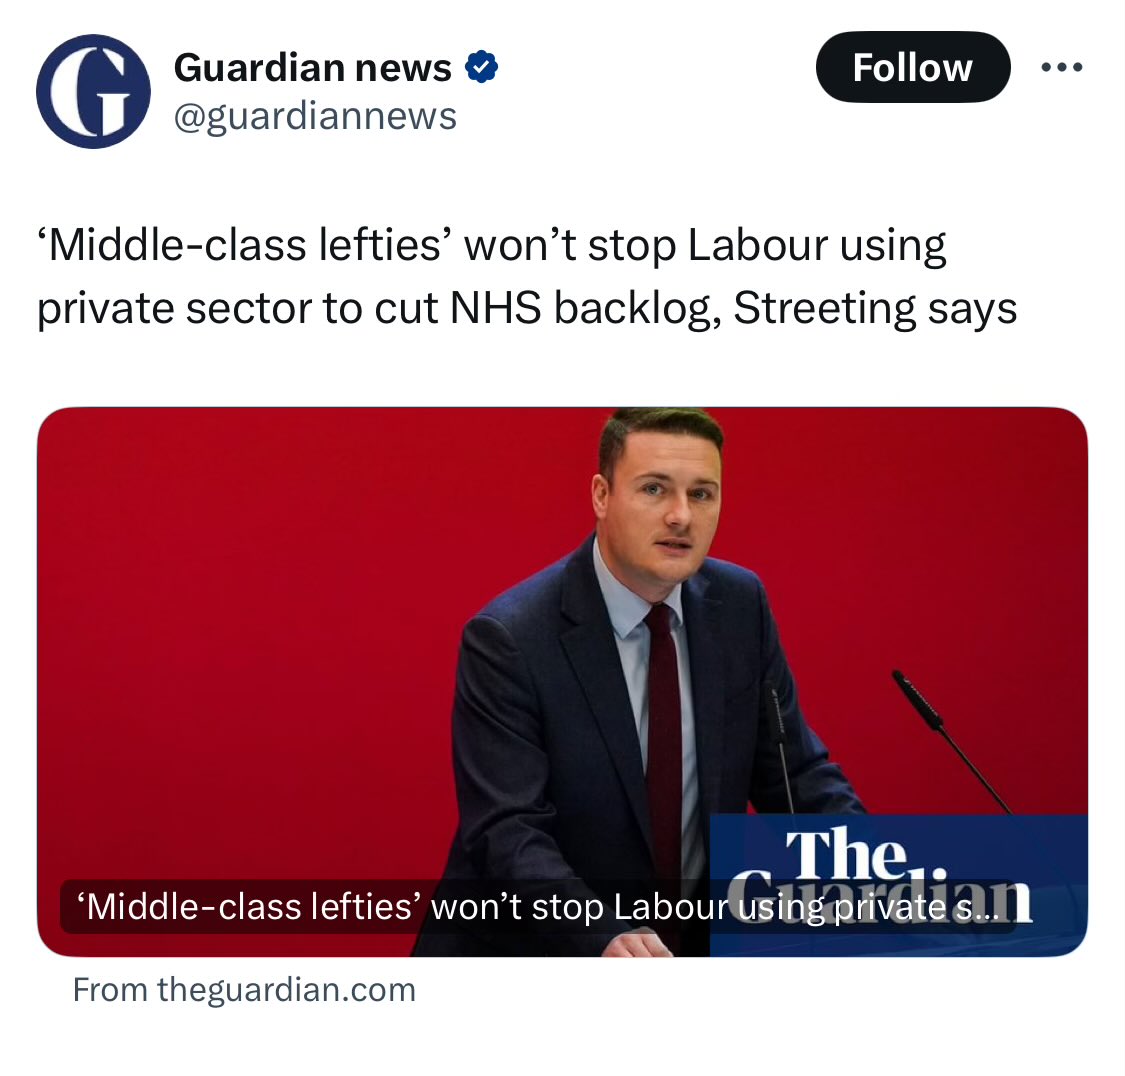 Excuse my language but Wes Streeting is a vile lickspittle c^nt. I wouldn’t ever vote for a party that creates a class war with the NHS privatisation at stake.